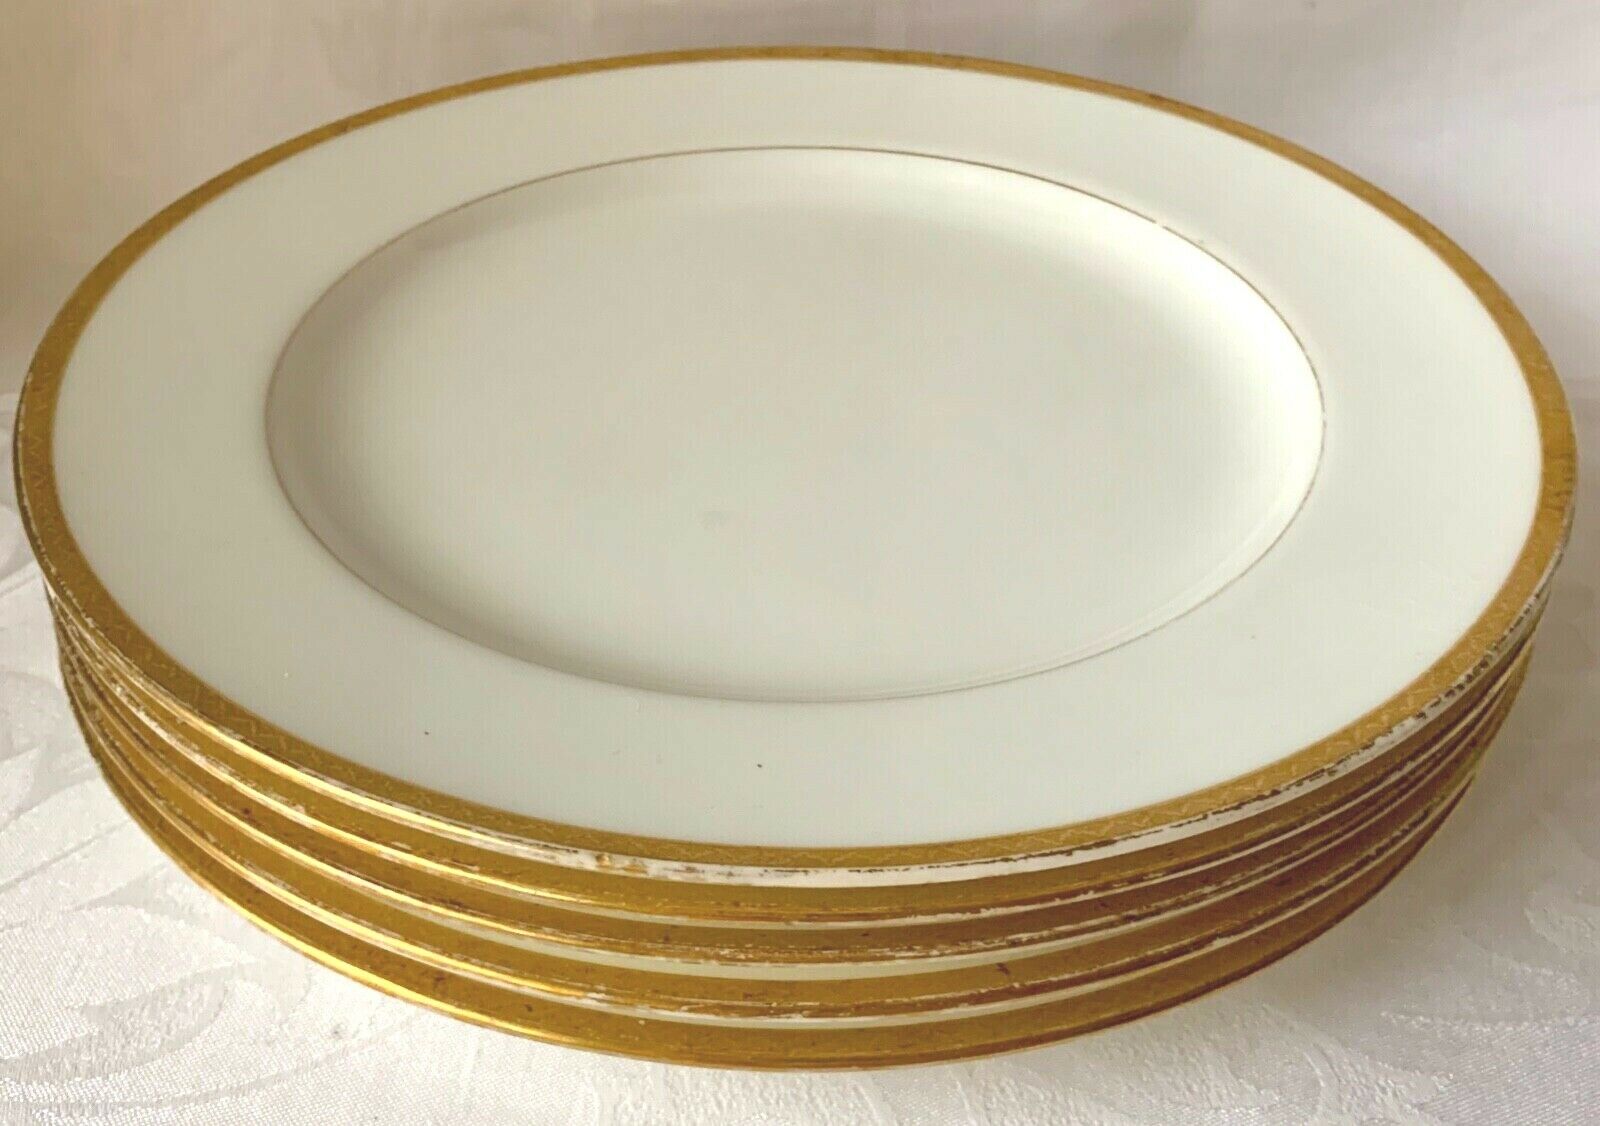 Set Of 5 Minton Gold And White Dinner Plates, Caldwell & Co, H1788, Wear